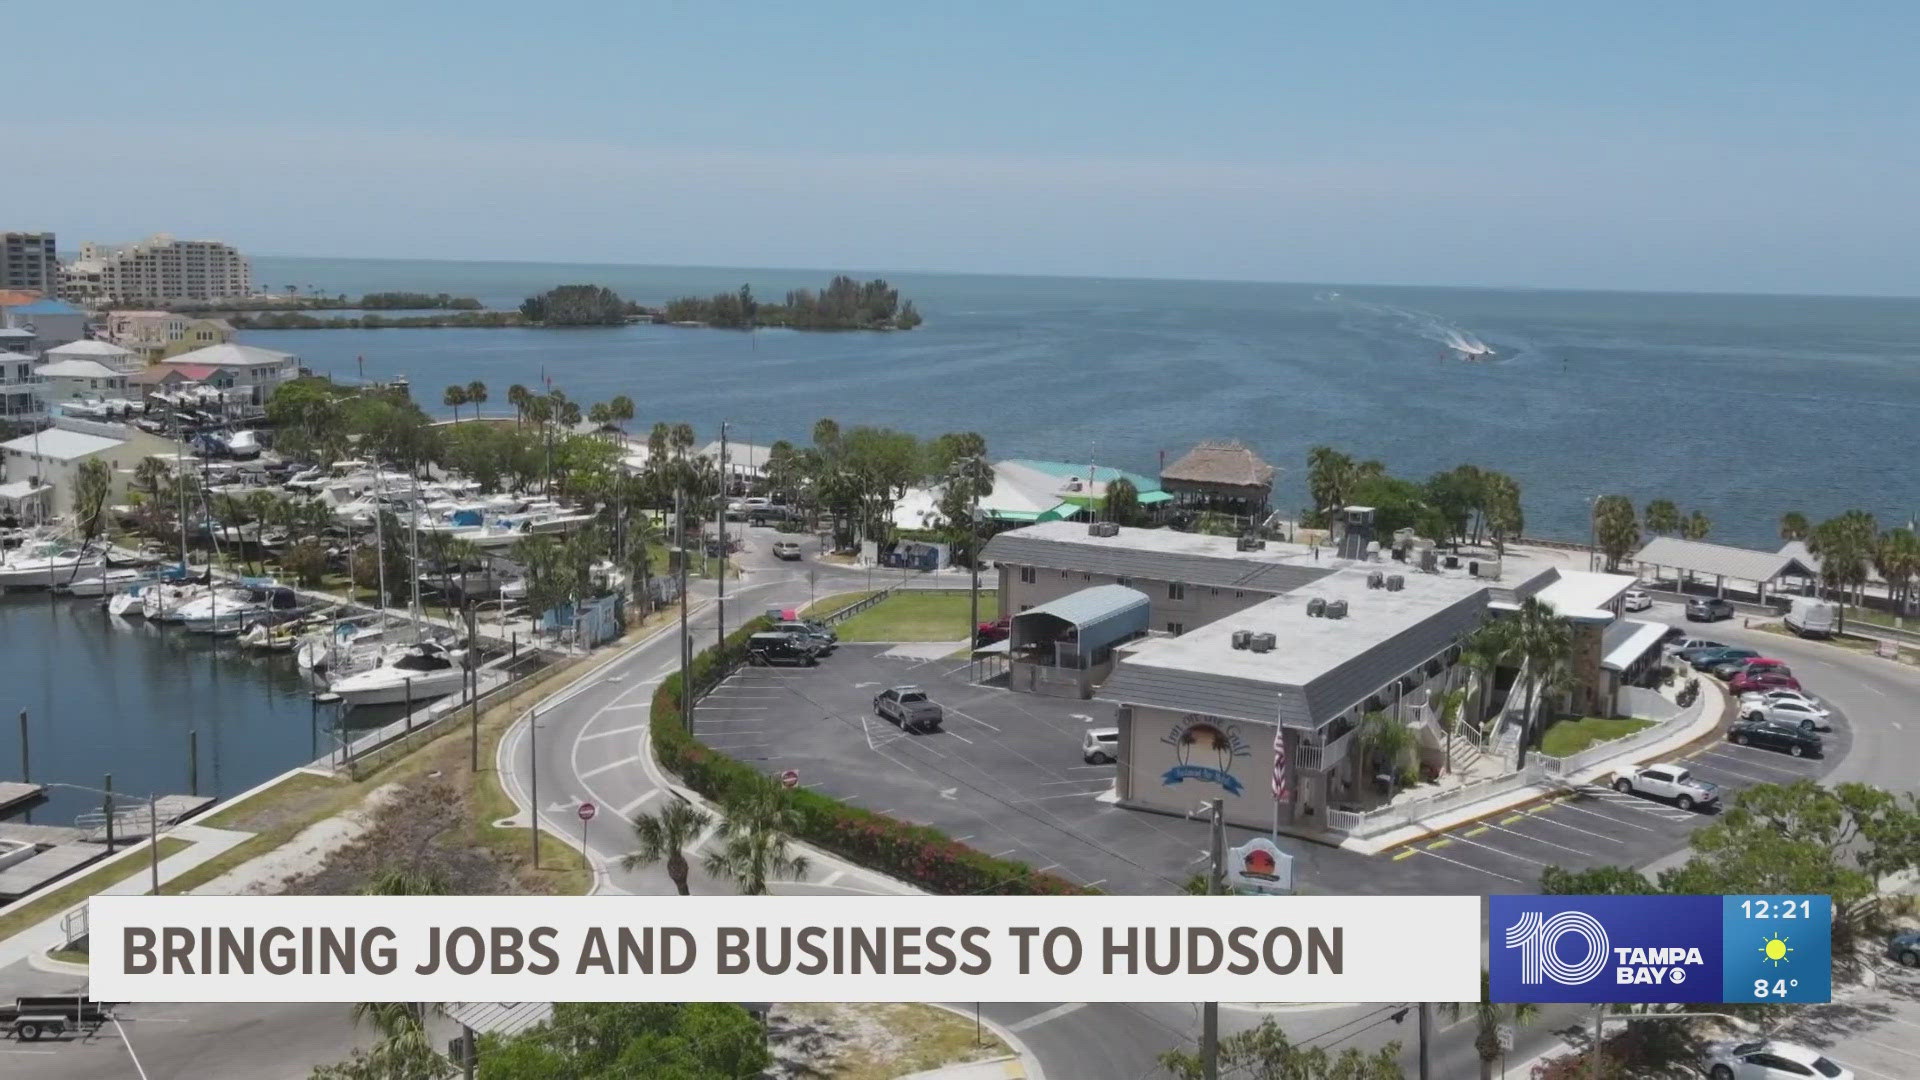 We are highlighting Pasco County, including the surrounding areas of Hudson.